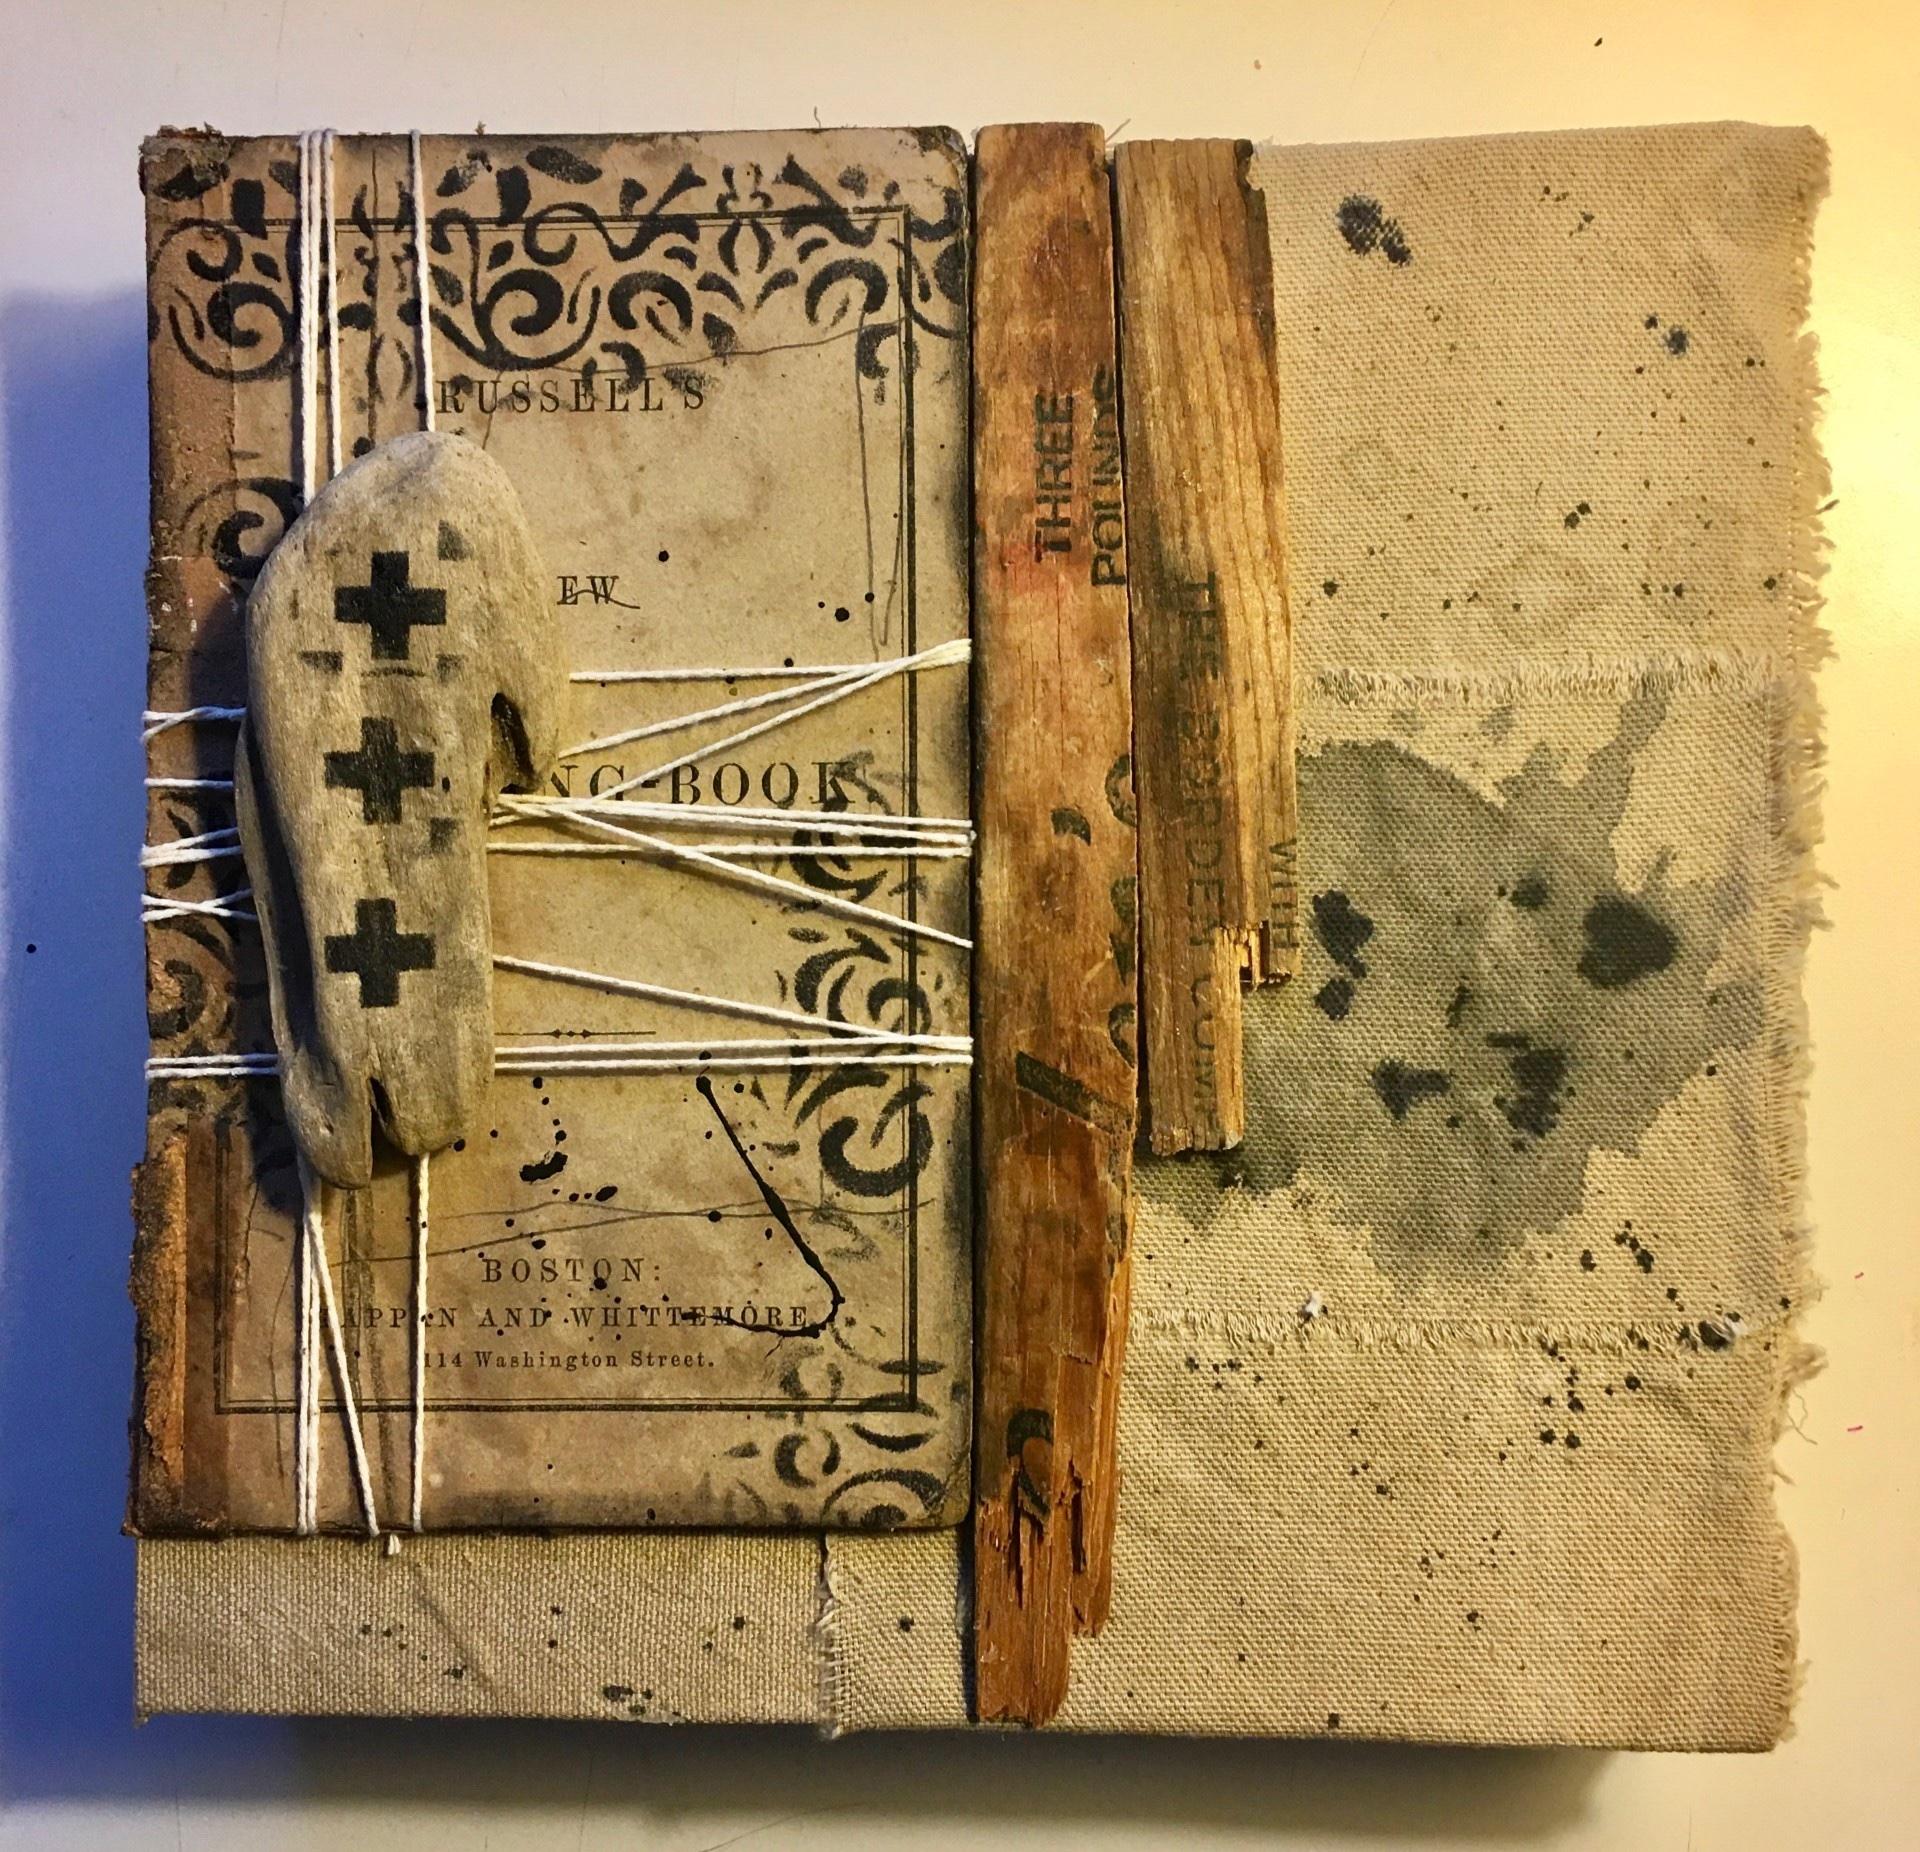 Saving the Books : mixed media collage